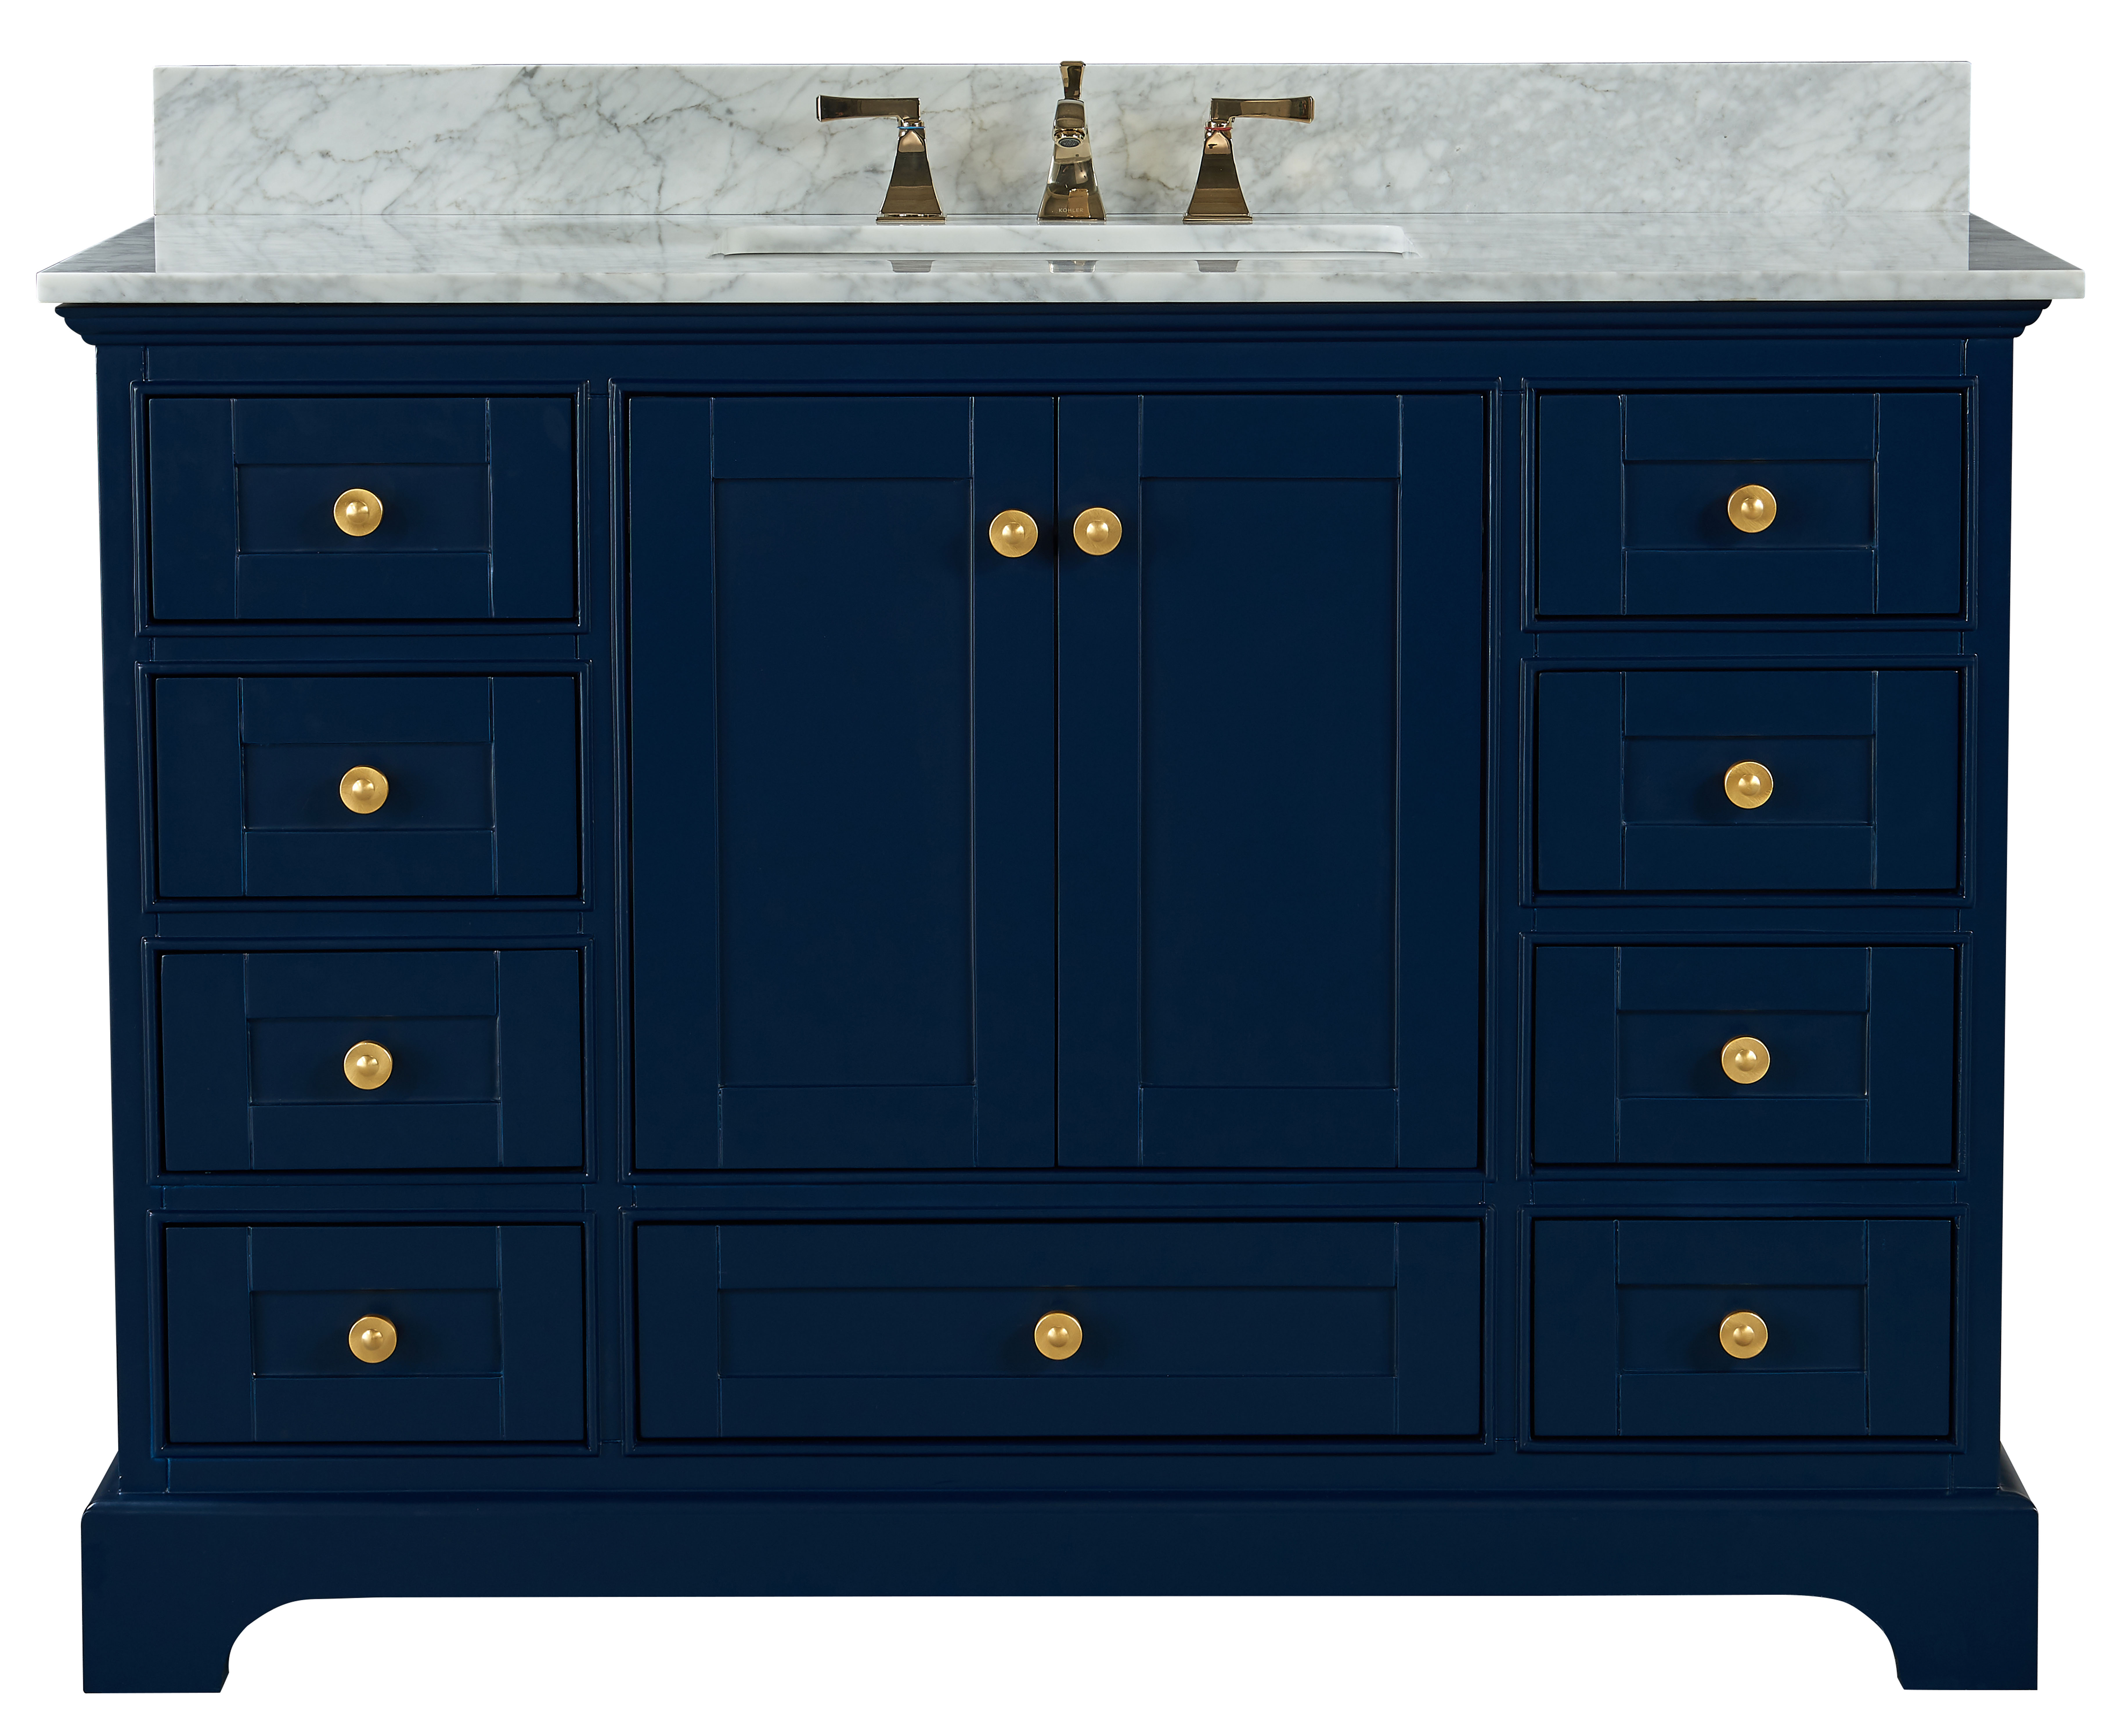 48" Bath Vanity Set in Heritage Blue with Italian Carrara White Marble Vanity Top and White Undermount Basin with Gold Hardware with Mirror Option